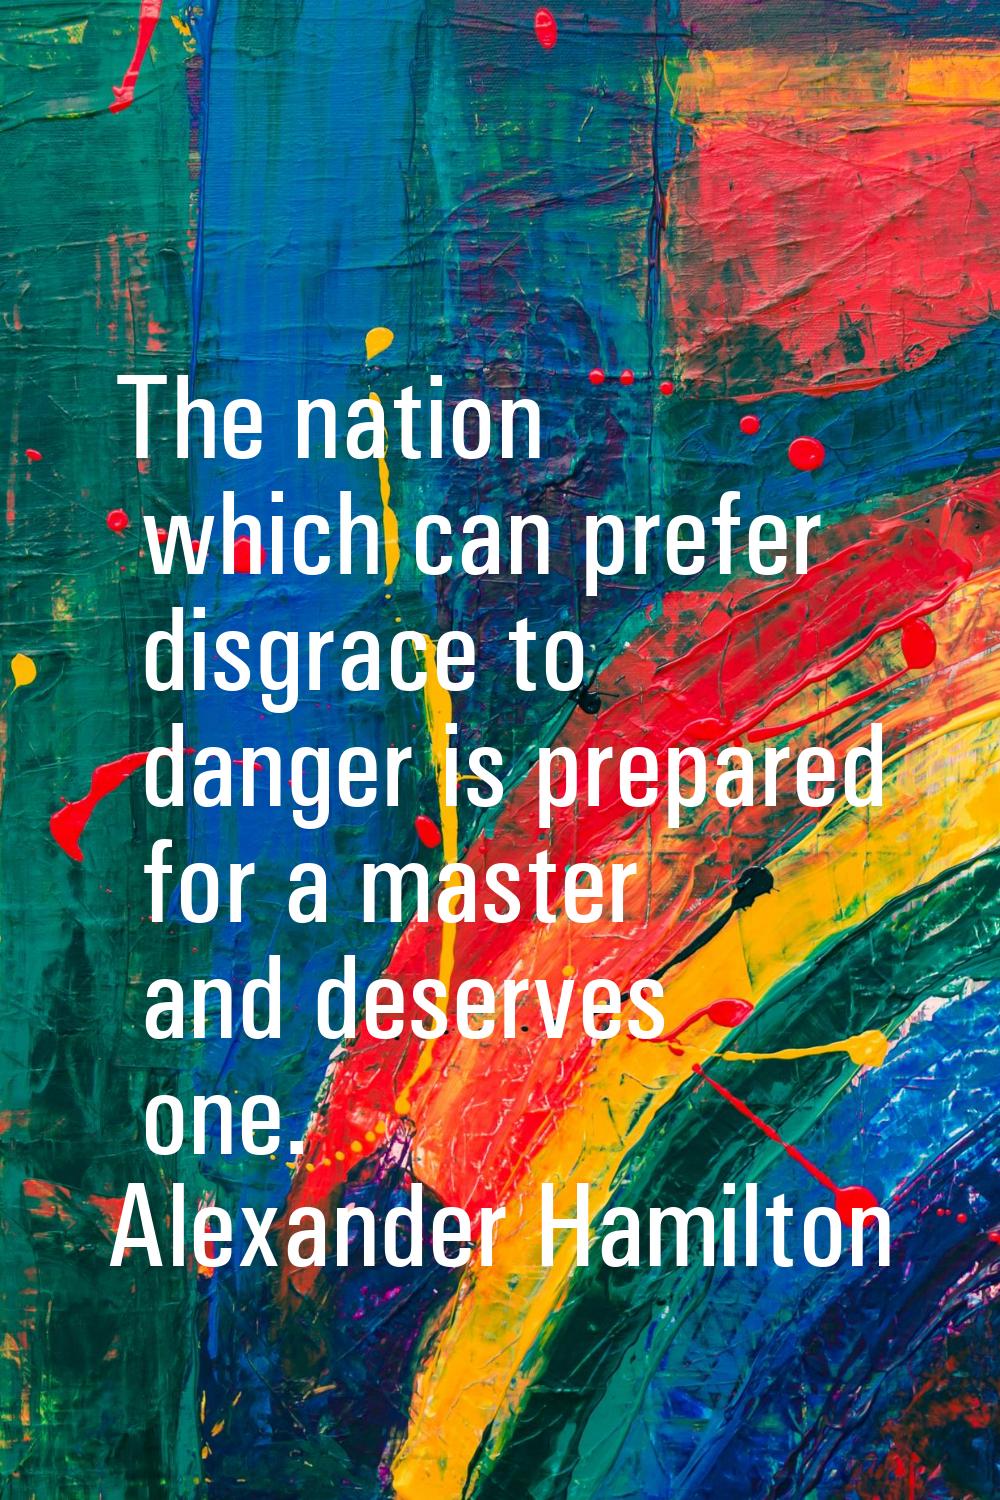 The nation which can prefer disgrace to danger is prepared for a master and deserves one.